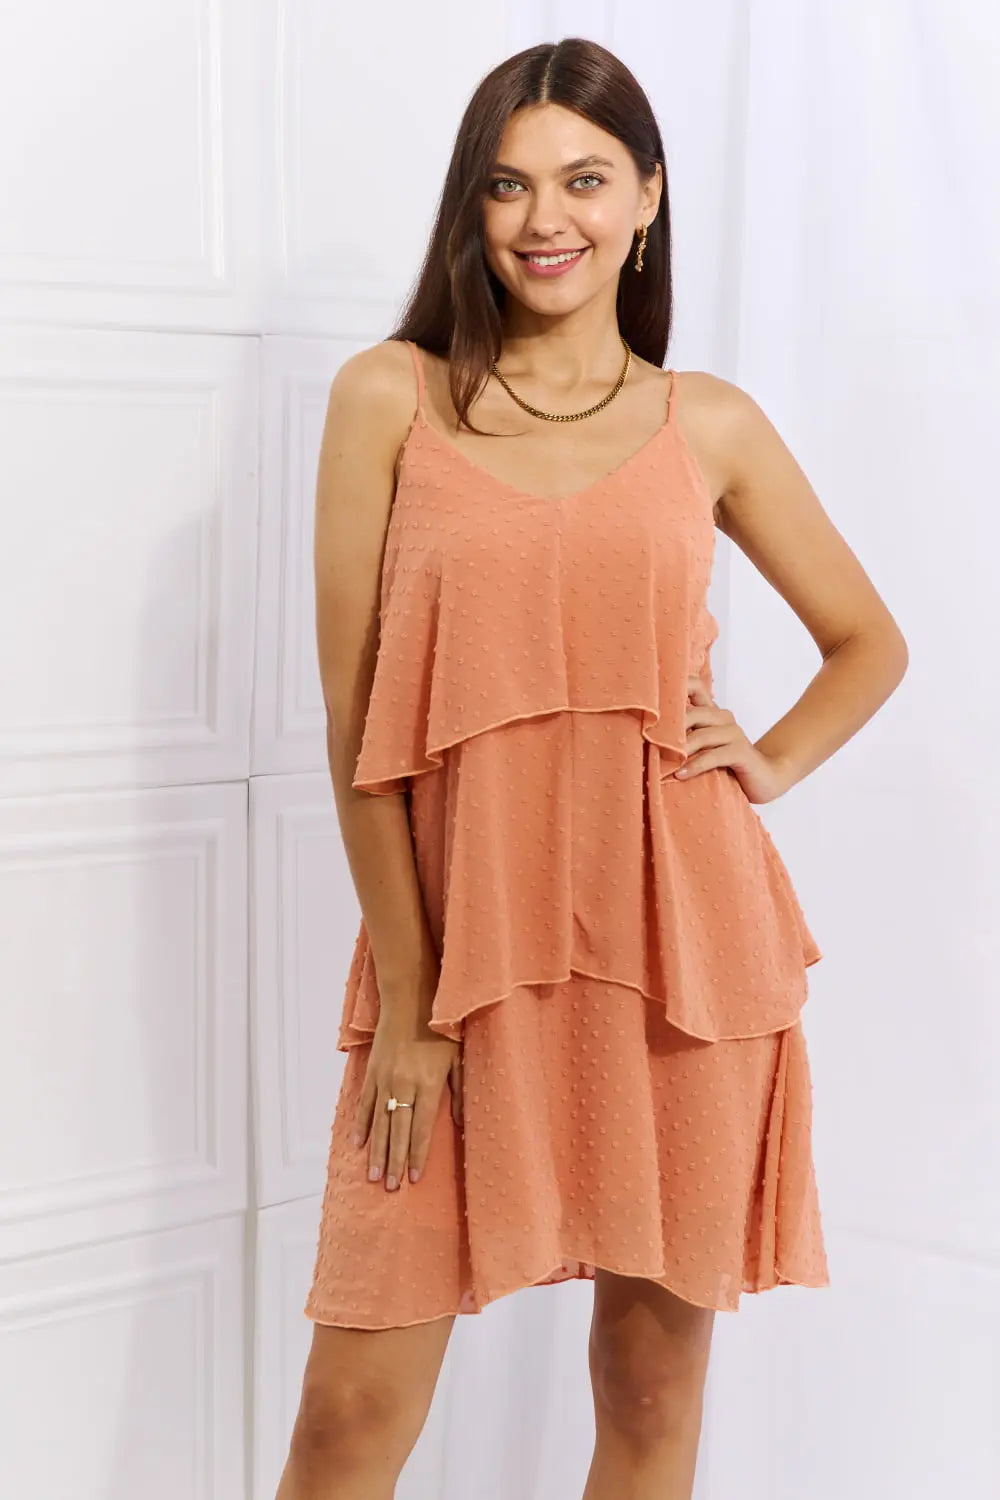 Culture Code By The River Cascade Ruffle Style Cami Dress in Soft White Culture Code